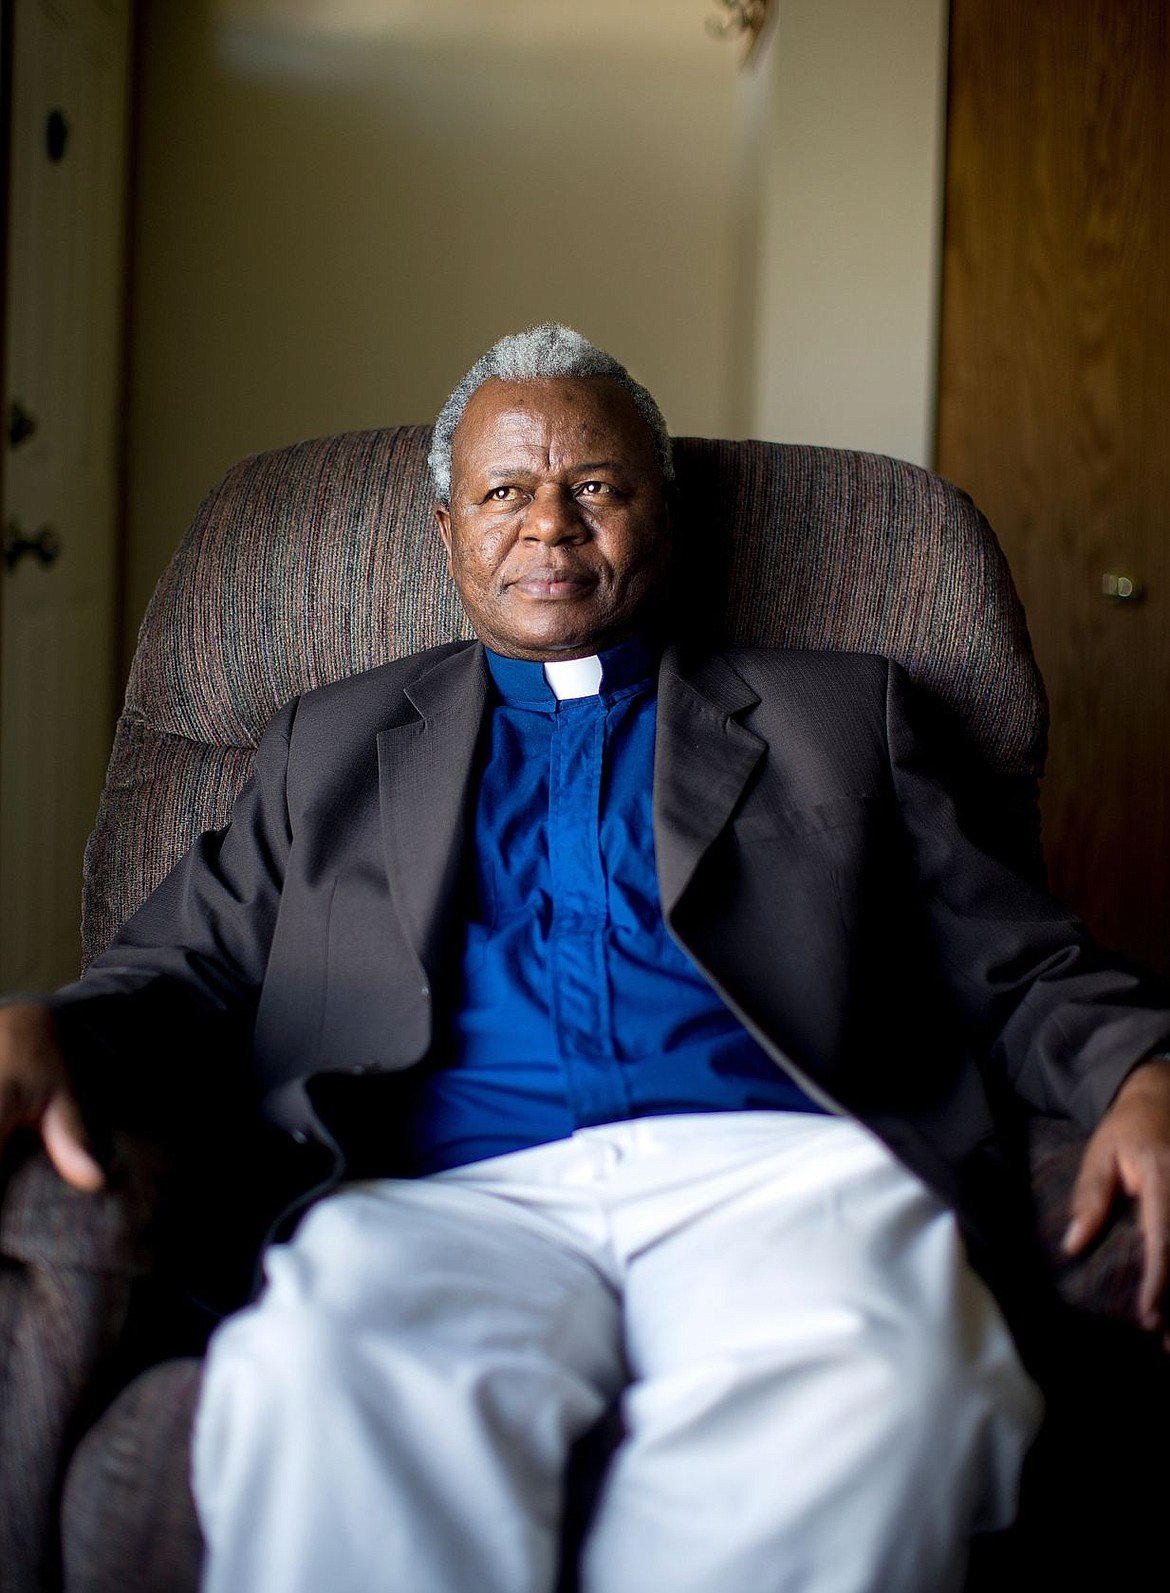 &lt;p&gt;Father Bruno D. Mgaya was instrumental in the founding of the Tanzania Orphans Upendo Community. An Idaho nonprofit, the Community finds homes for Tanzanian orphans ages 3-12. Father Bruno, a native of Tanzania, was taking care of himself at the age of five. He is photographed here on Monday in his Rathdrum home.&lt;/p&gt;